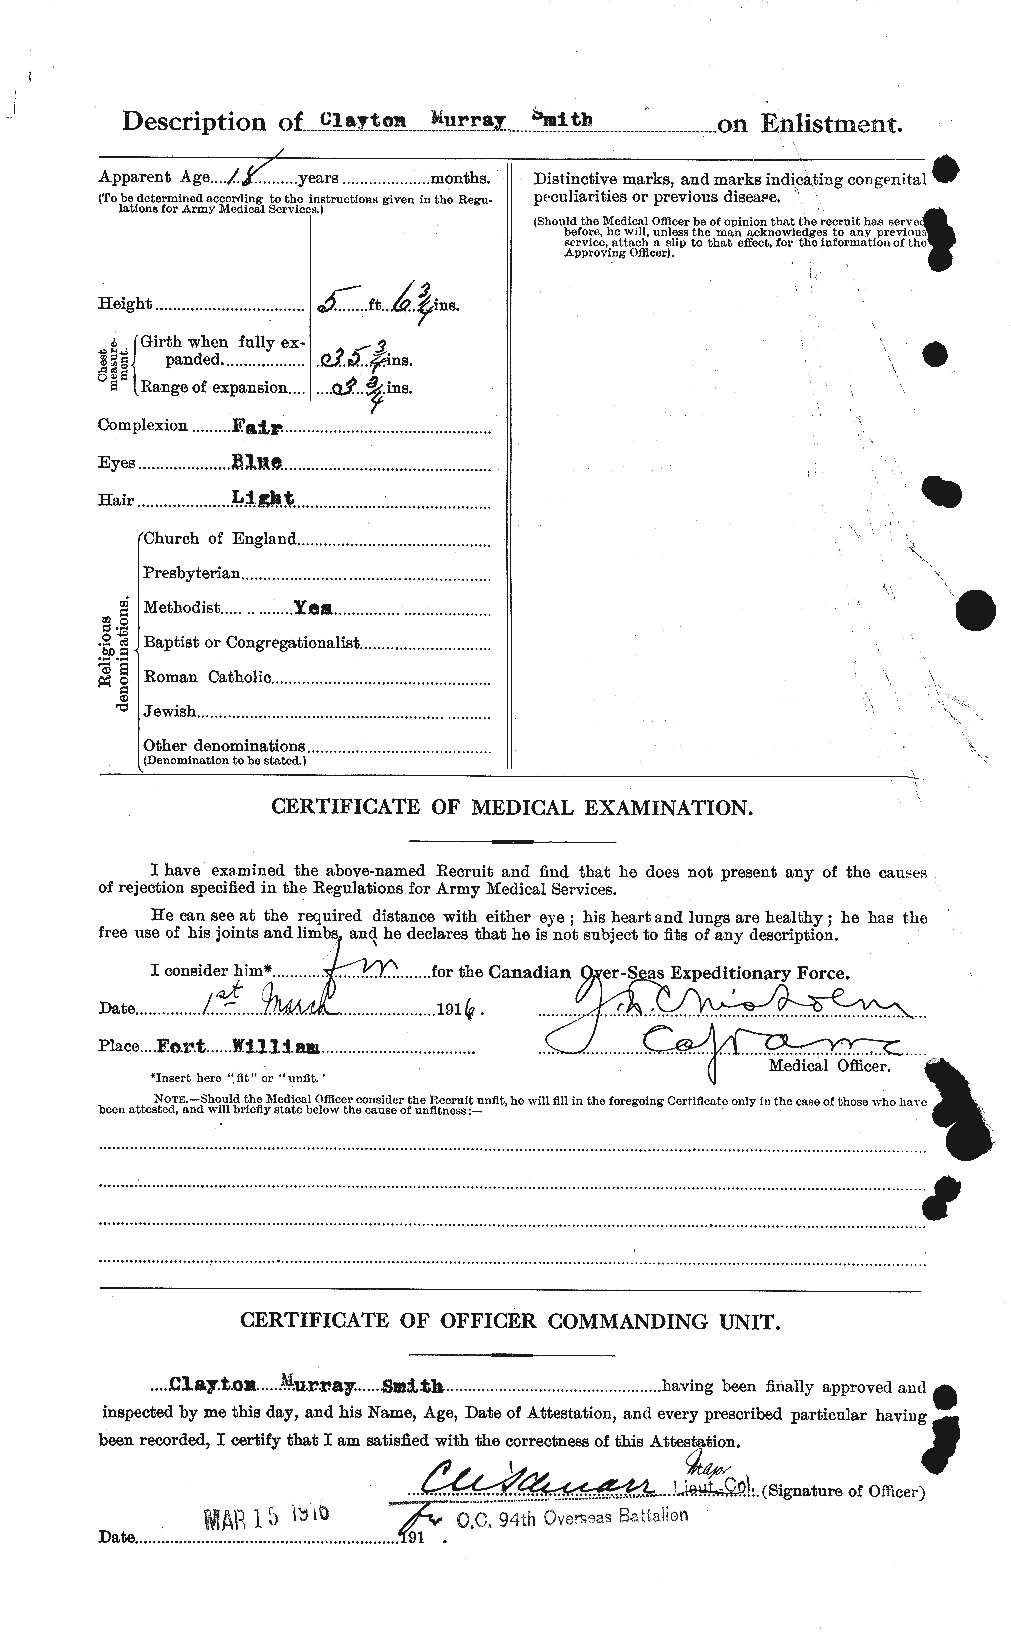 Personnel Records of the First World War - CEF 103757b